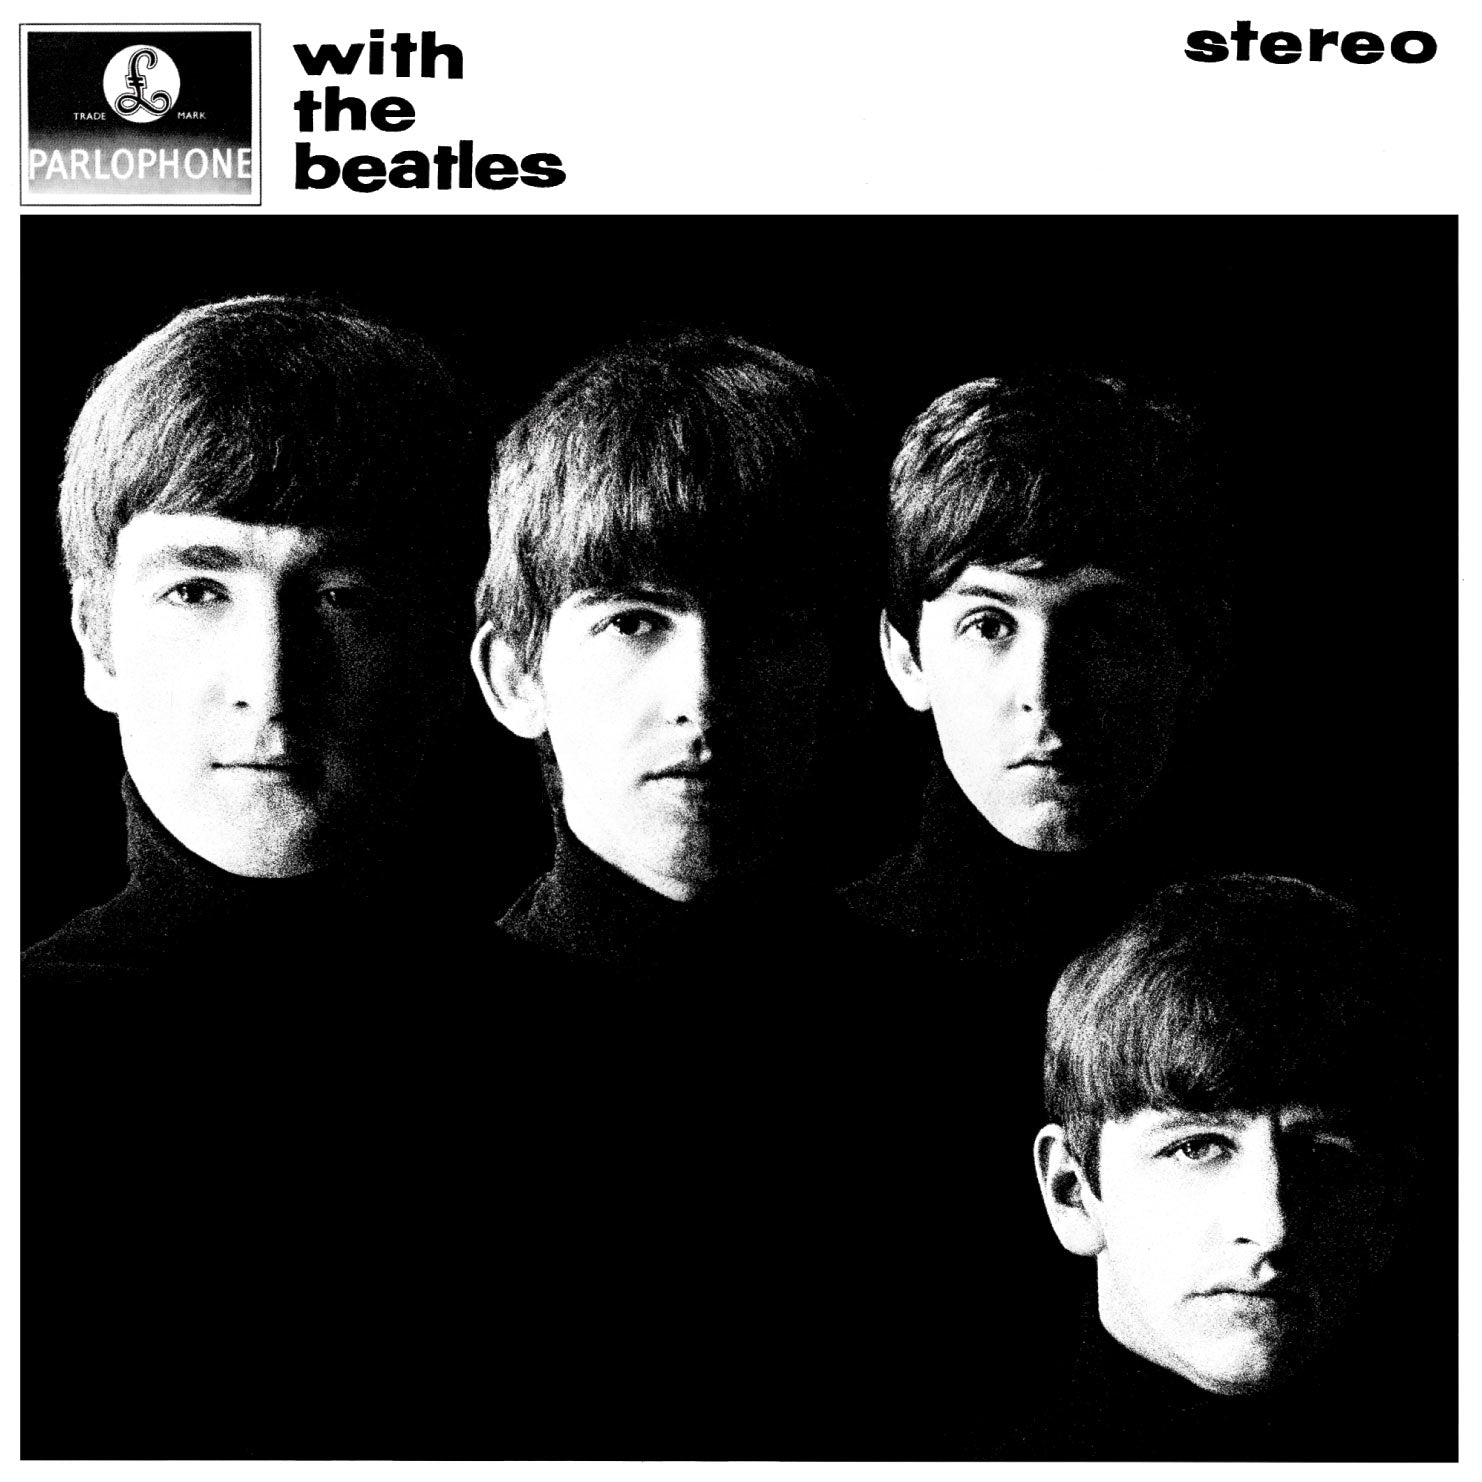 Beatles - With The Beatles, Stereo (Vinyl LP)